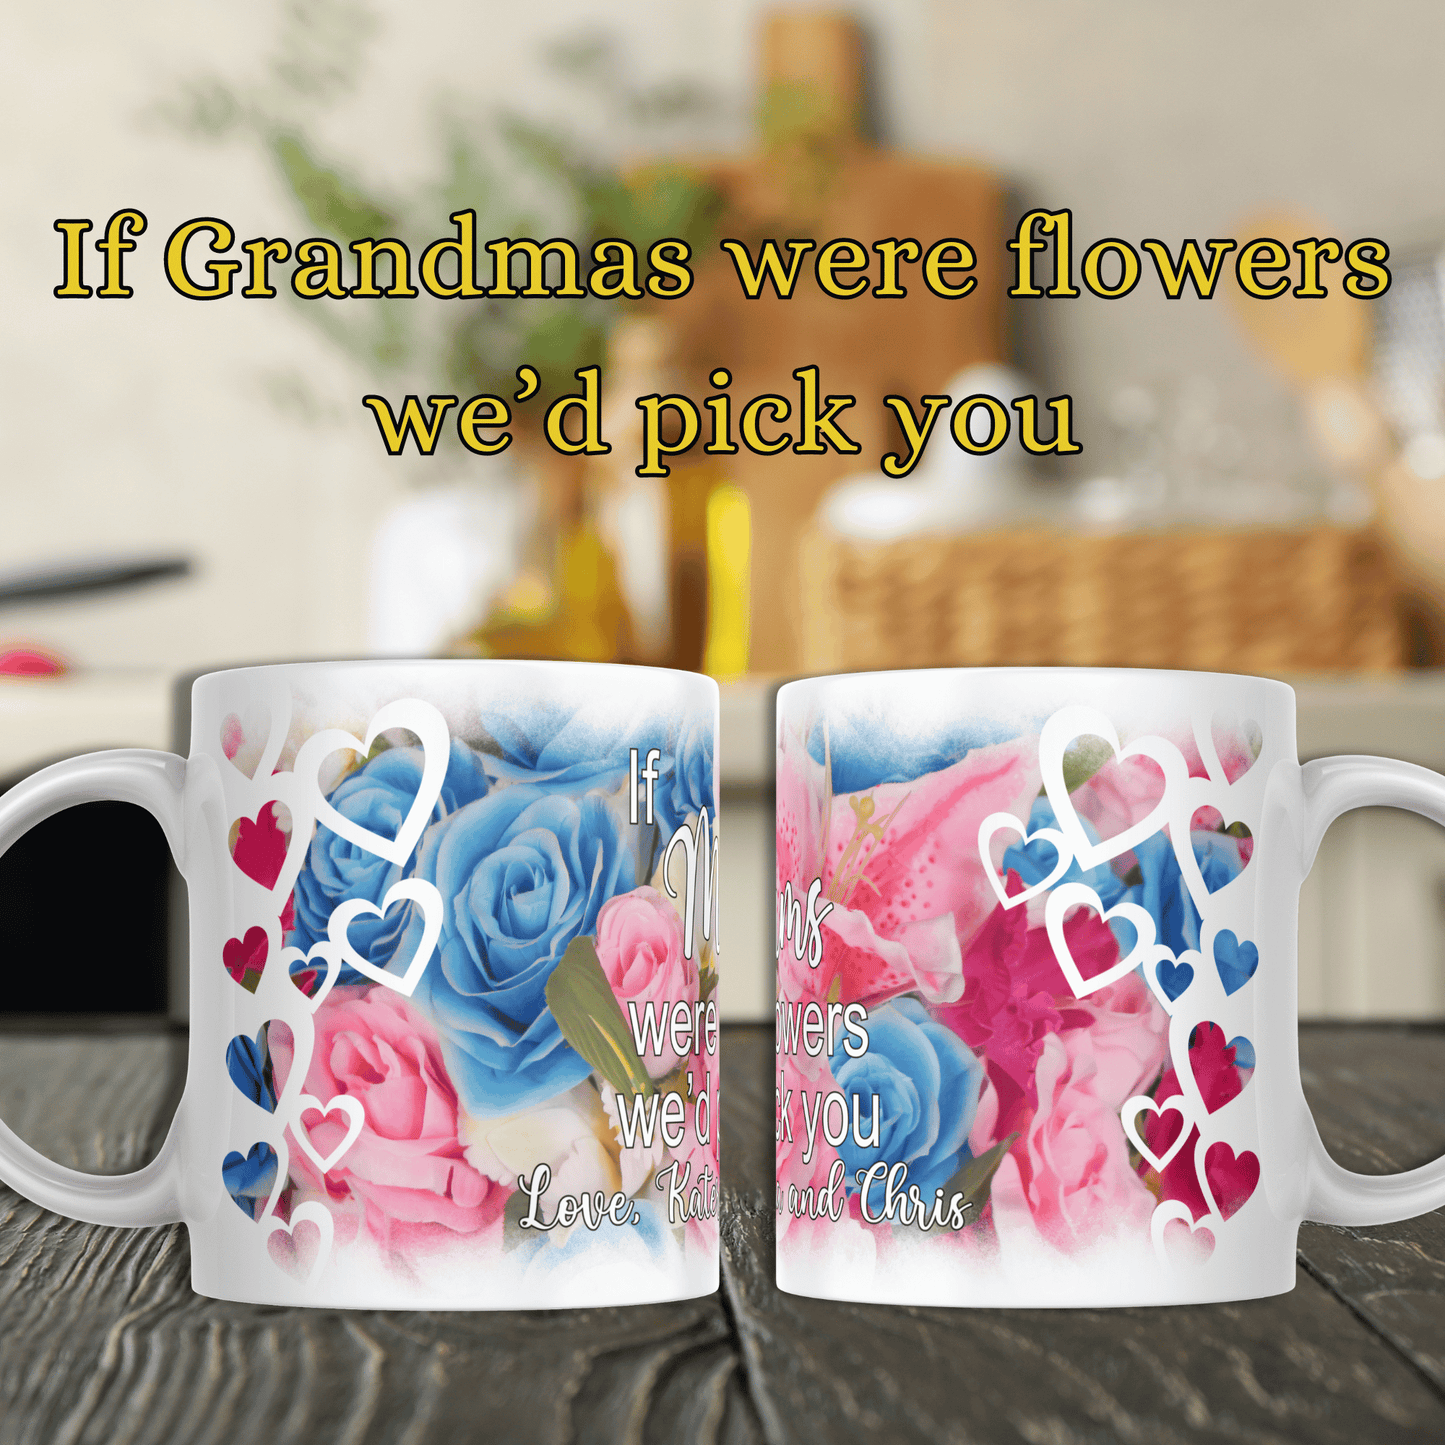 Mother's Day Mug, If Mums Were Flowers, Roses